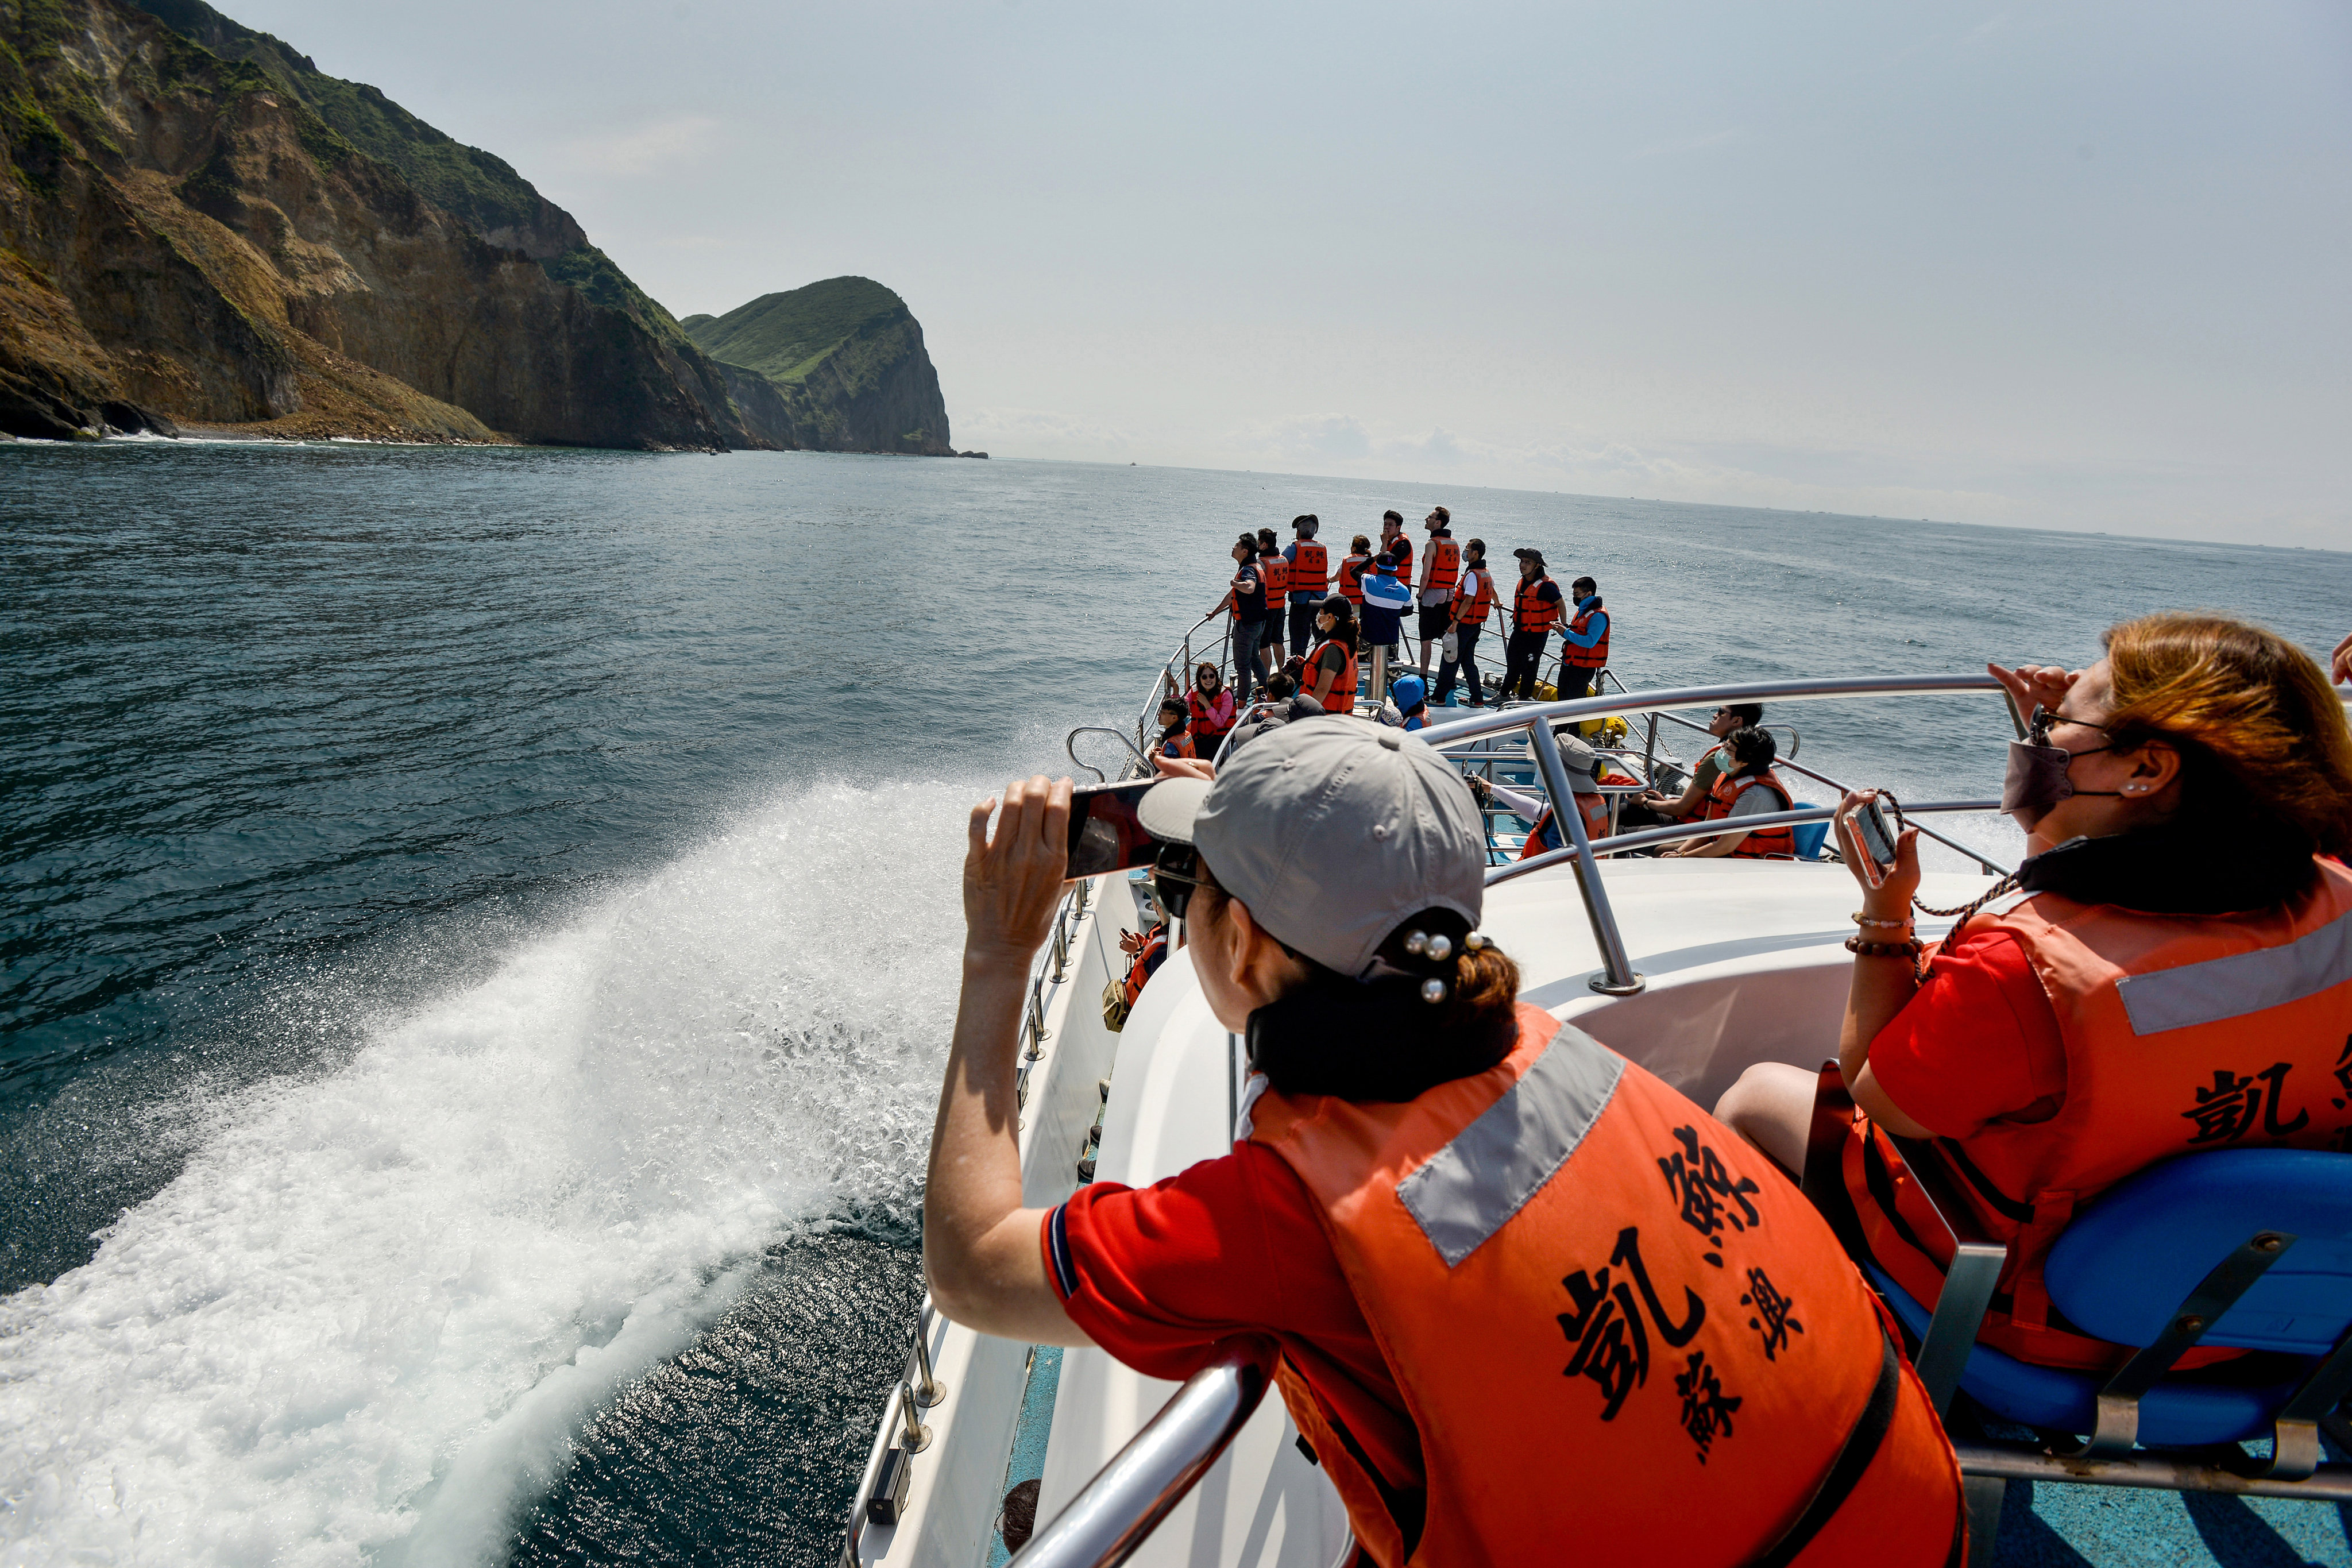 Tourists head to Taiwan’s Turtle Island on a cruise boat from Wushi Port in Toucheng. The area is popular with surfers and divers, and boasts some of Taiwan’s best beaches. Photo: Chris Stowers/Panos